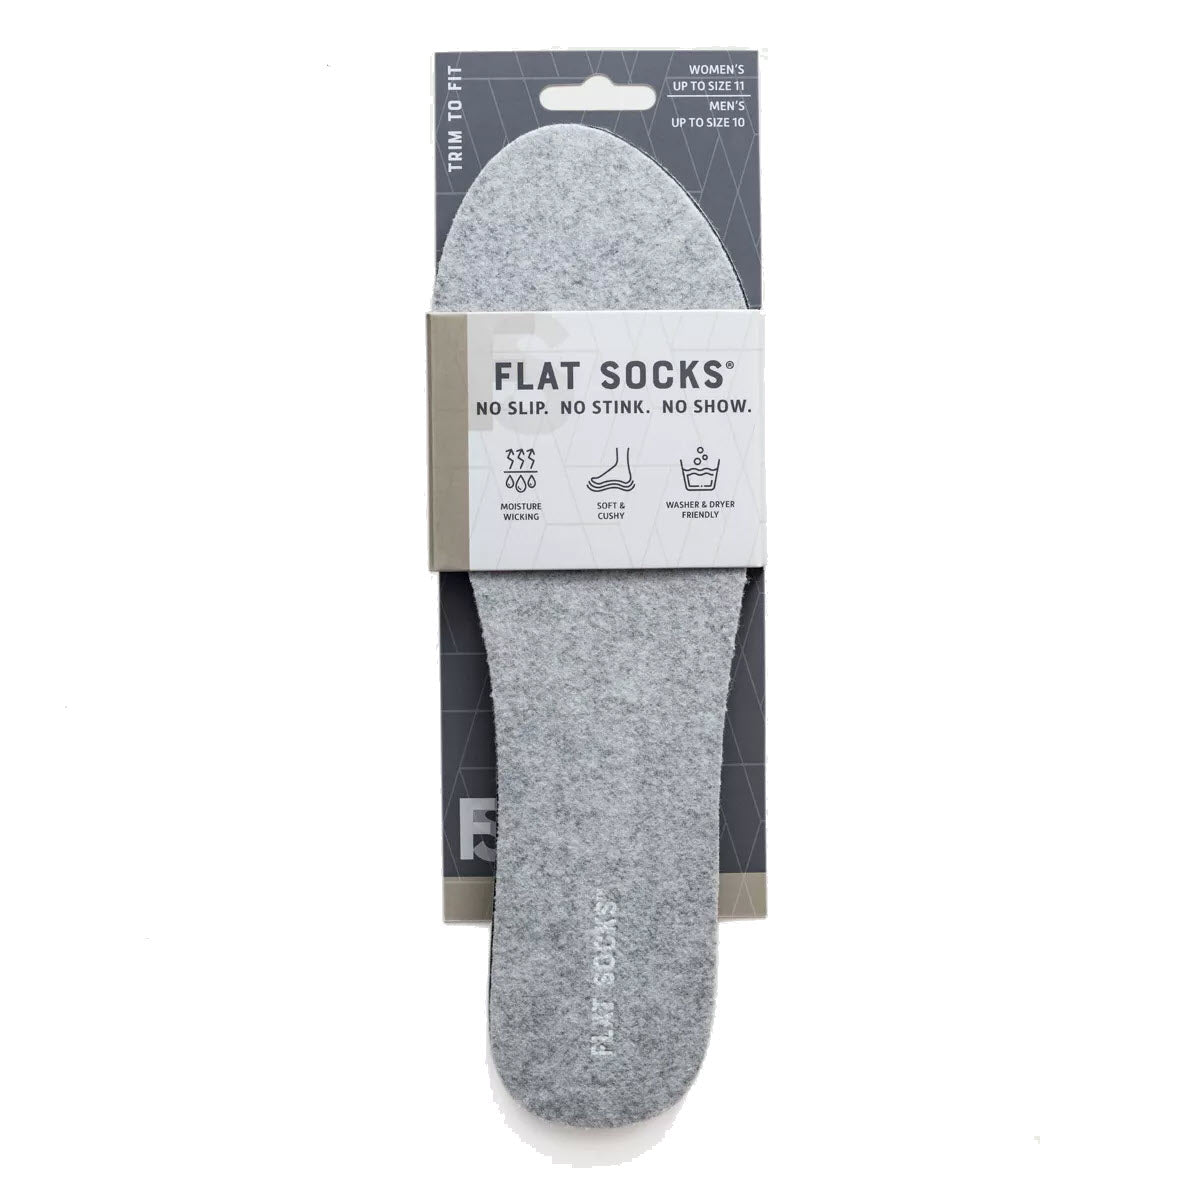 A Flat Socks Light Gray - Mens flat sock displayed in front of its packaging, which is labeled &quot;FLAT SOCKS, no slip, no stink, no show.